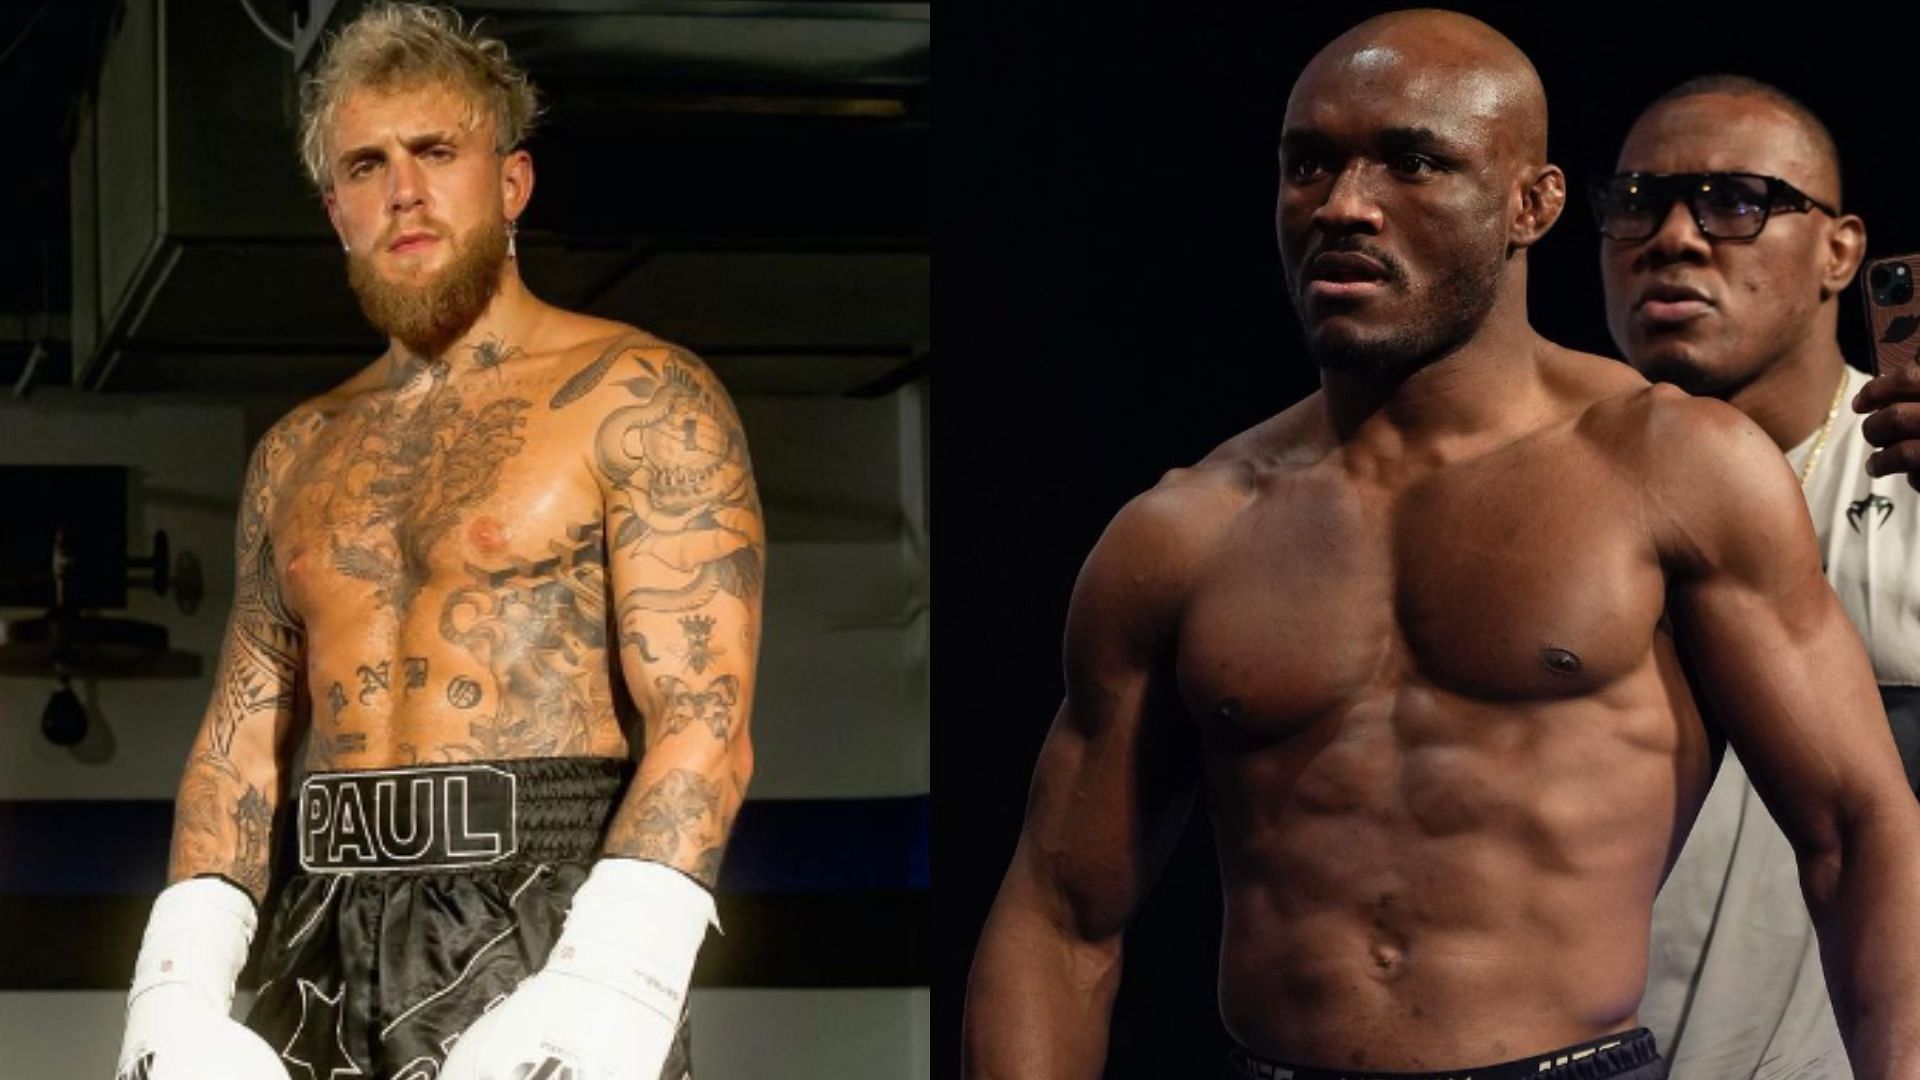 (right) following their 2021 beef [Images courtesy of @jakepaul &amp; @usman84kg on Instagram] Jake Paul (left) branded a liar by Kamaru Usman (right) following their 2021 beef [Images courtesy of @jakepaul &amp; @usman84kg on Instagram]